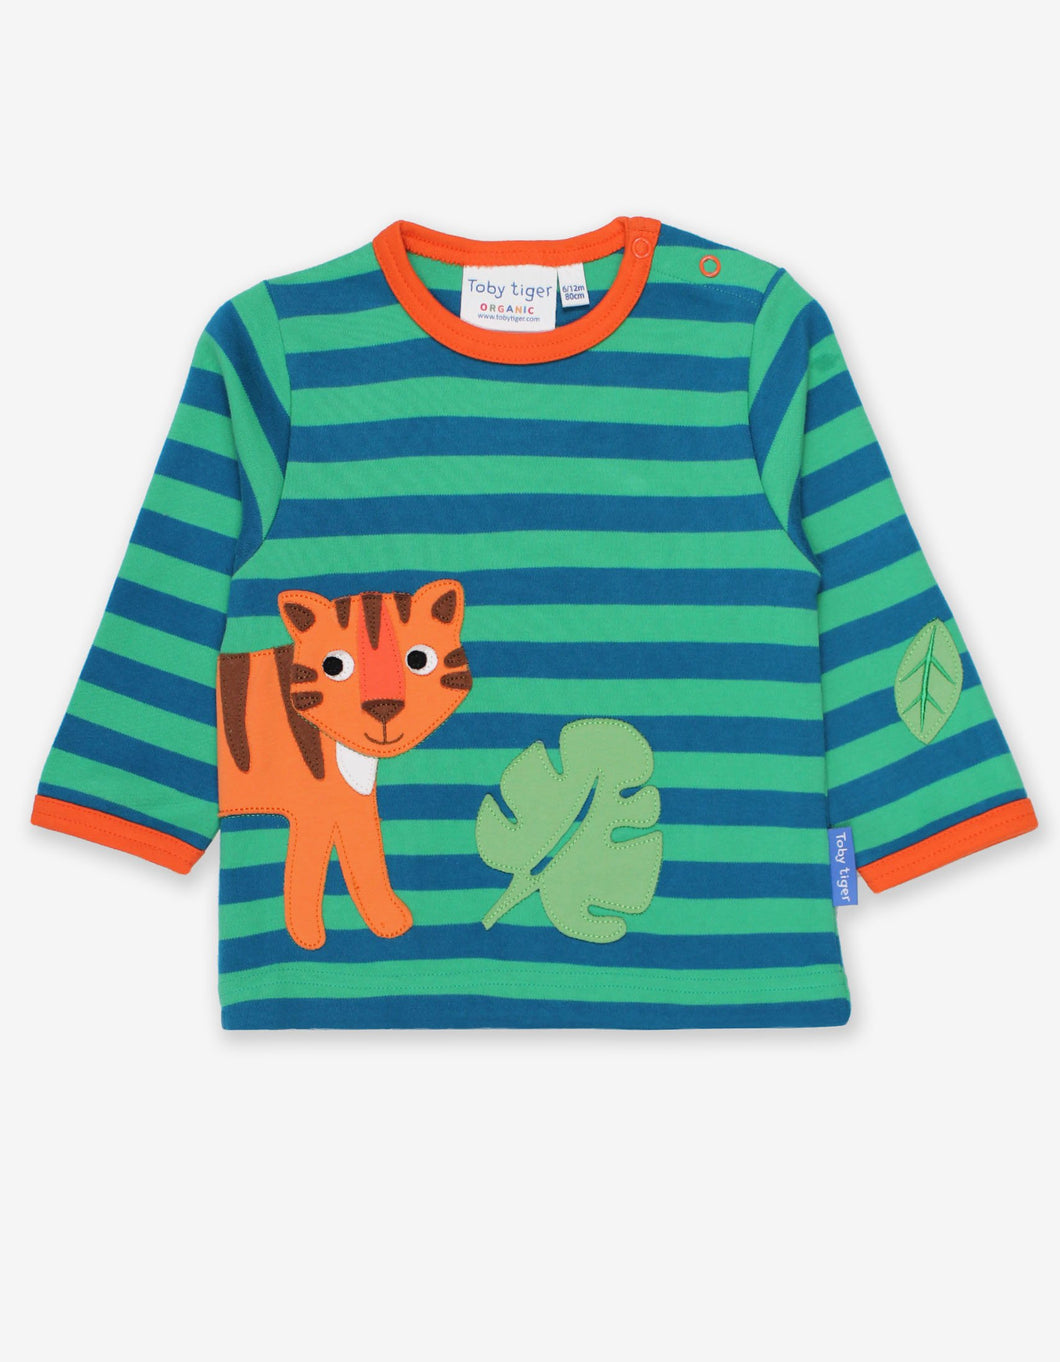 Long-sleeved shirt with tiger appliqué made from organic cotton